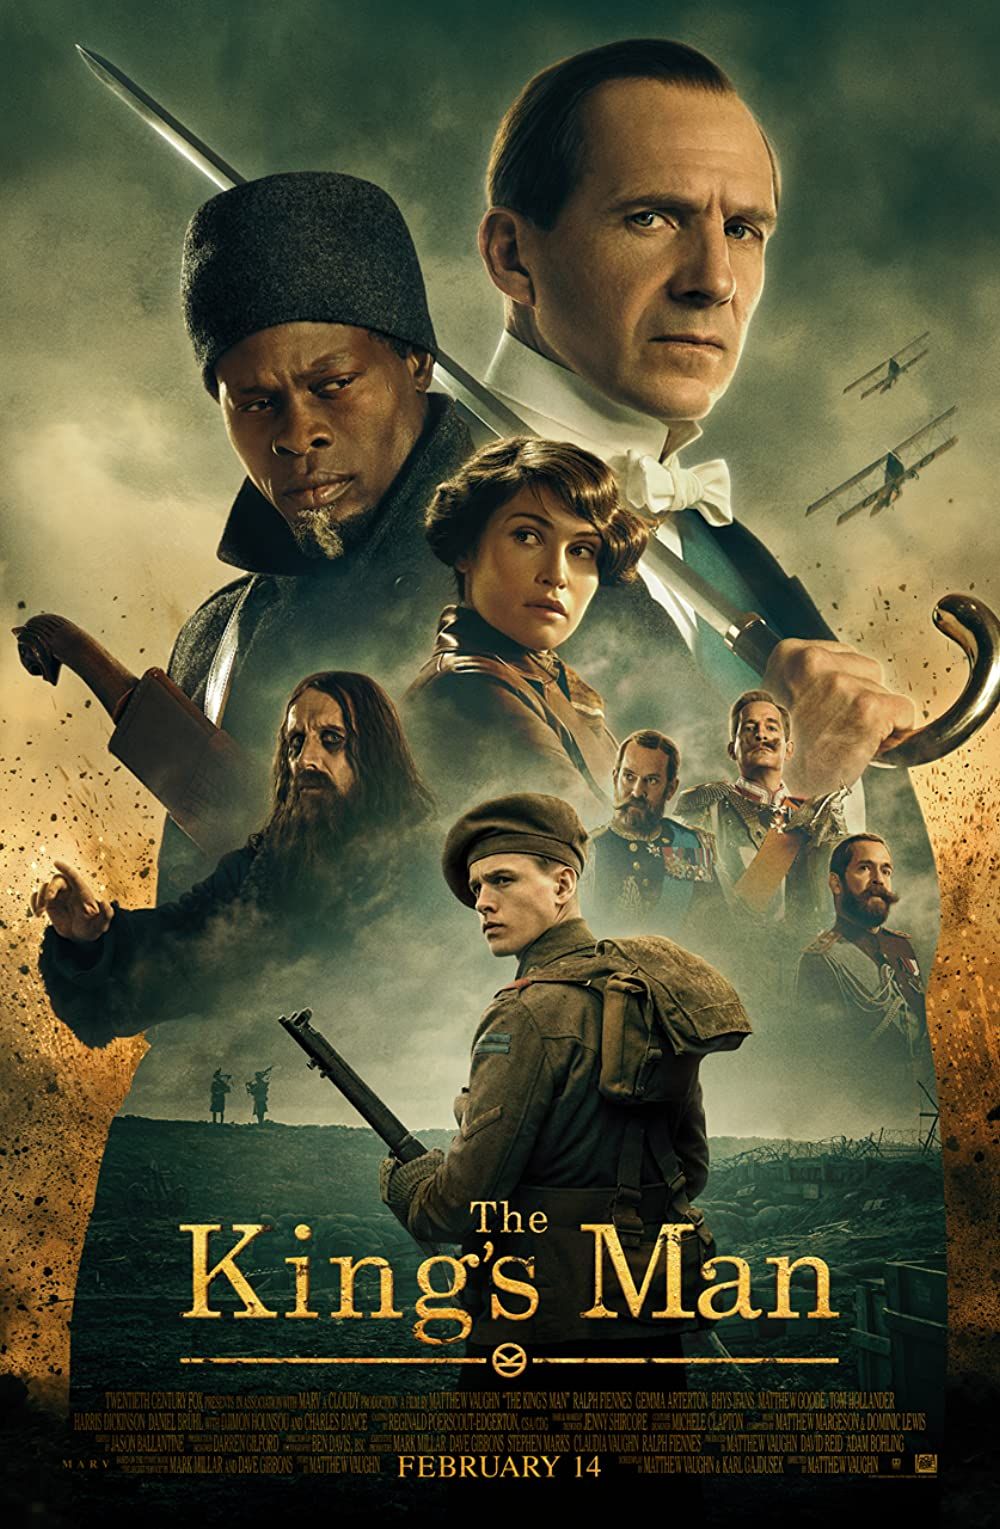 The Kings Man (2021) Hindi Dubbed BluRay download full movie